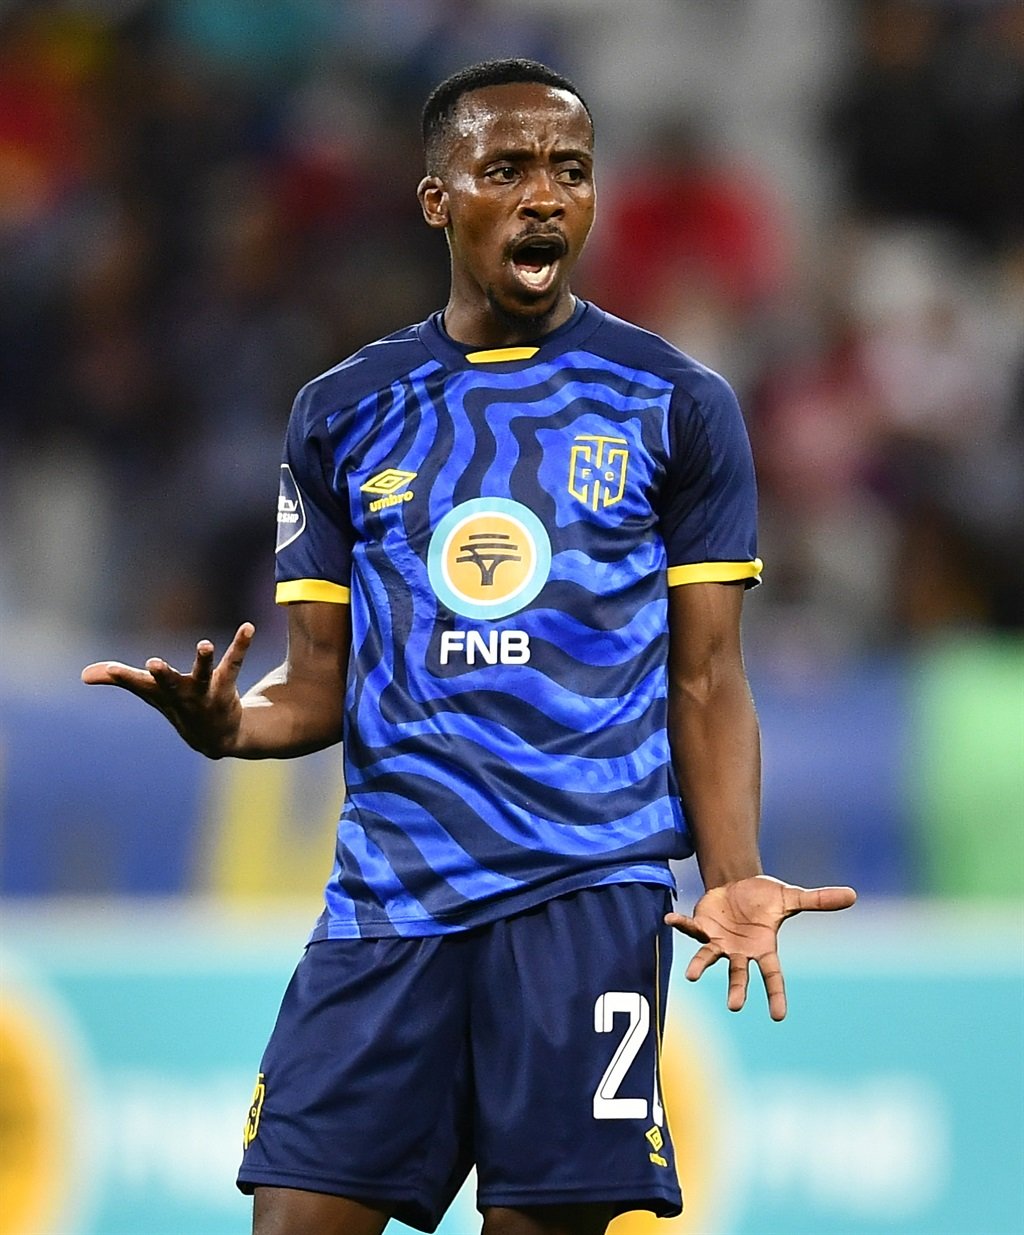 CAPE TOWN, SOUTH AFRICA - JANUARY 20: Thabo Nodada of CTCFC during the DStv Premiership match between Cape Town City FC and TS Galaxy at DHL Stadium on January 20, 2023 in Cape Town, South Africa. (Photo by Ashley Vlotman/Gallo Images)